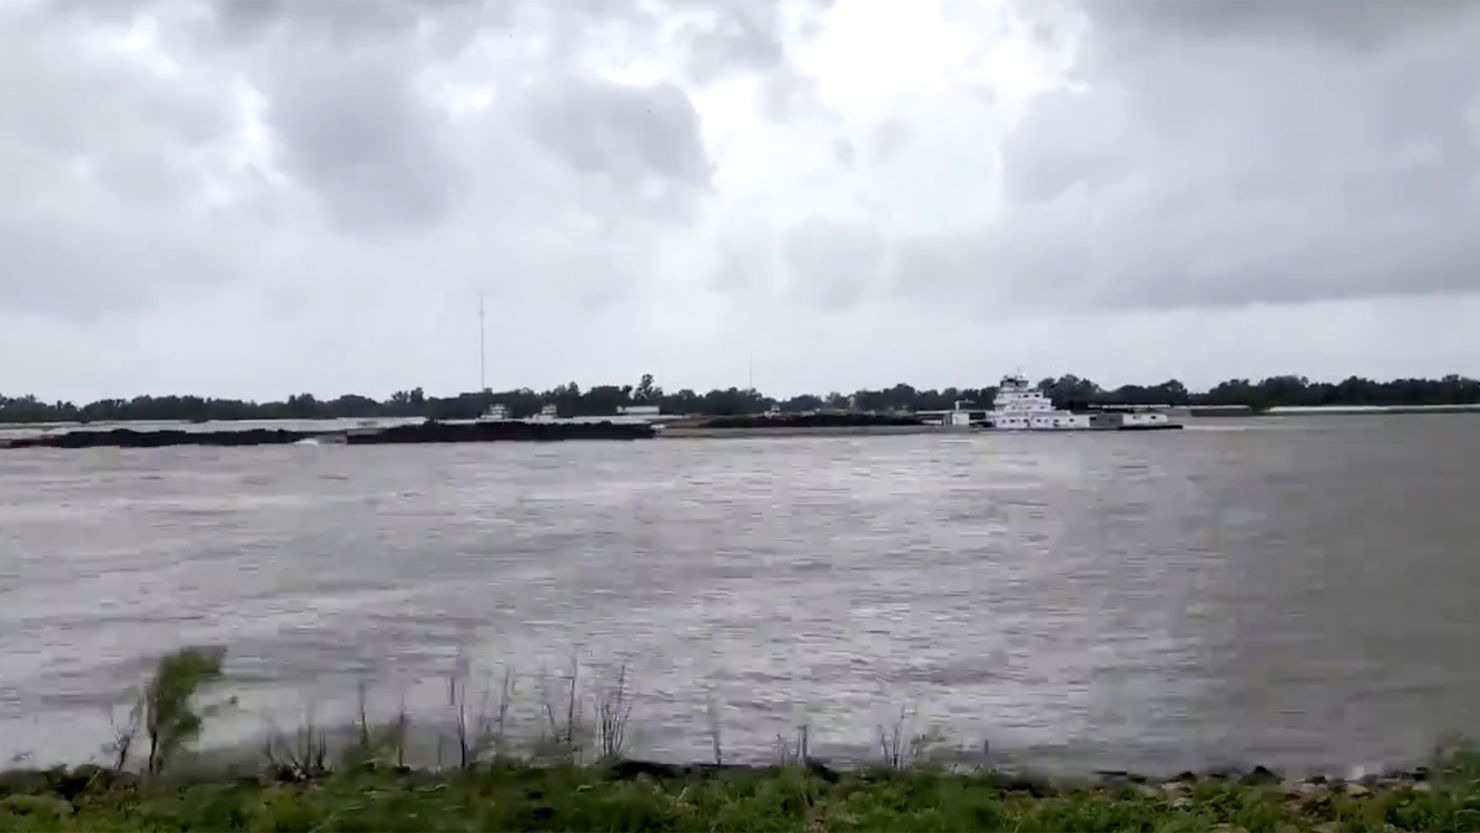 Hurricane Laura's winds were so strong, it reversed the direction of the tide on the Mississippi River.